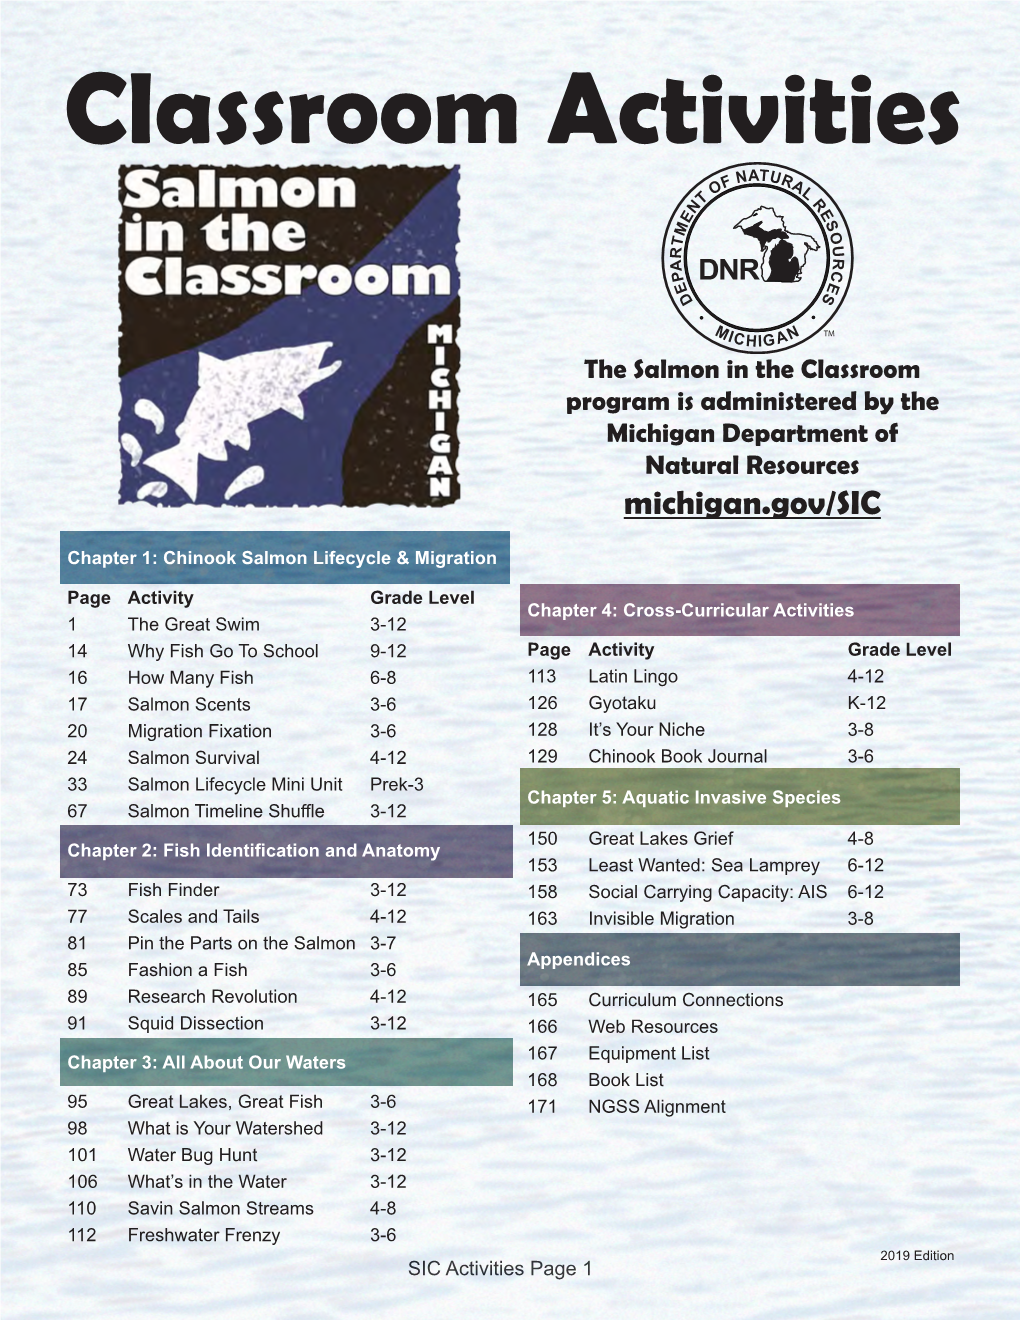 Salmon in the Classroom Activity Guide